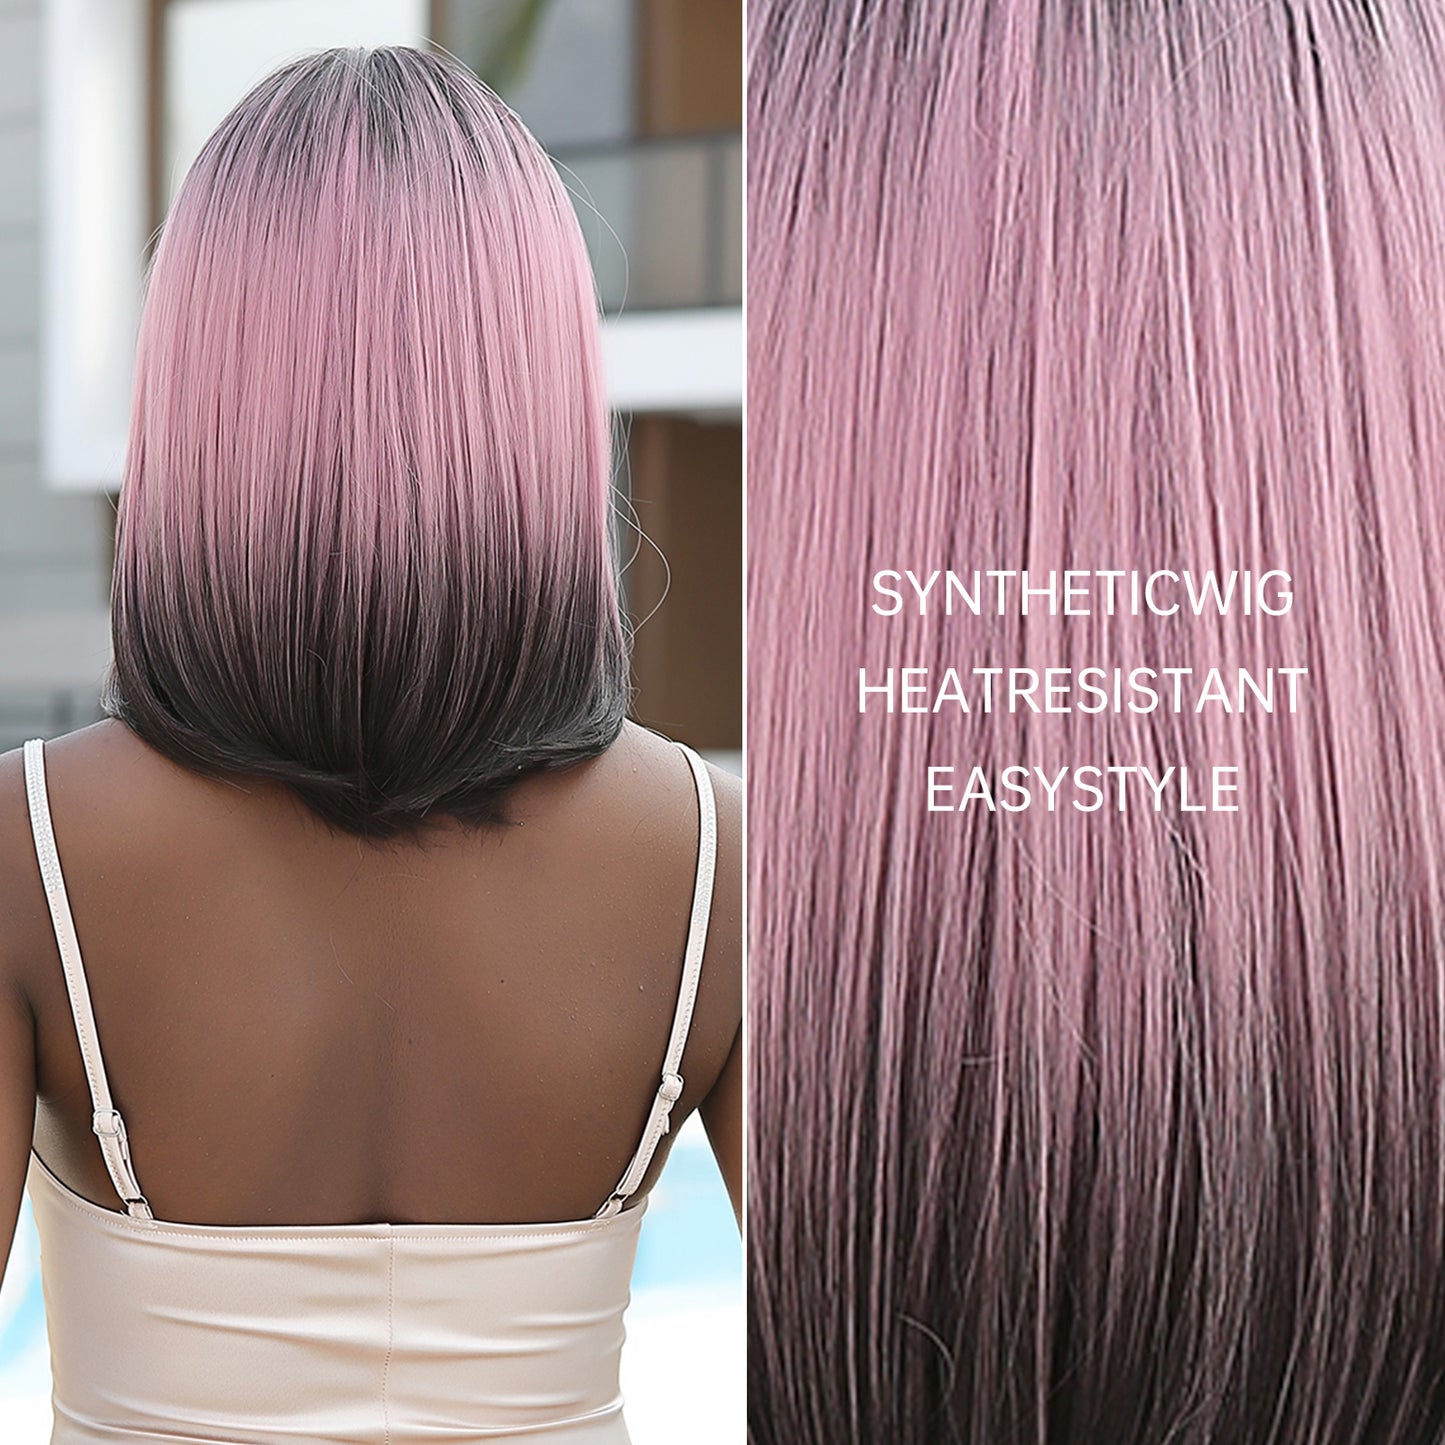 【Lysandra】Loxology |16 Inch Long Straight Pink Gradient Black with Bangs Synthetic Wig